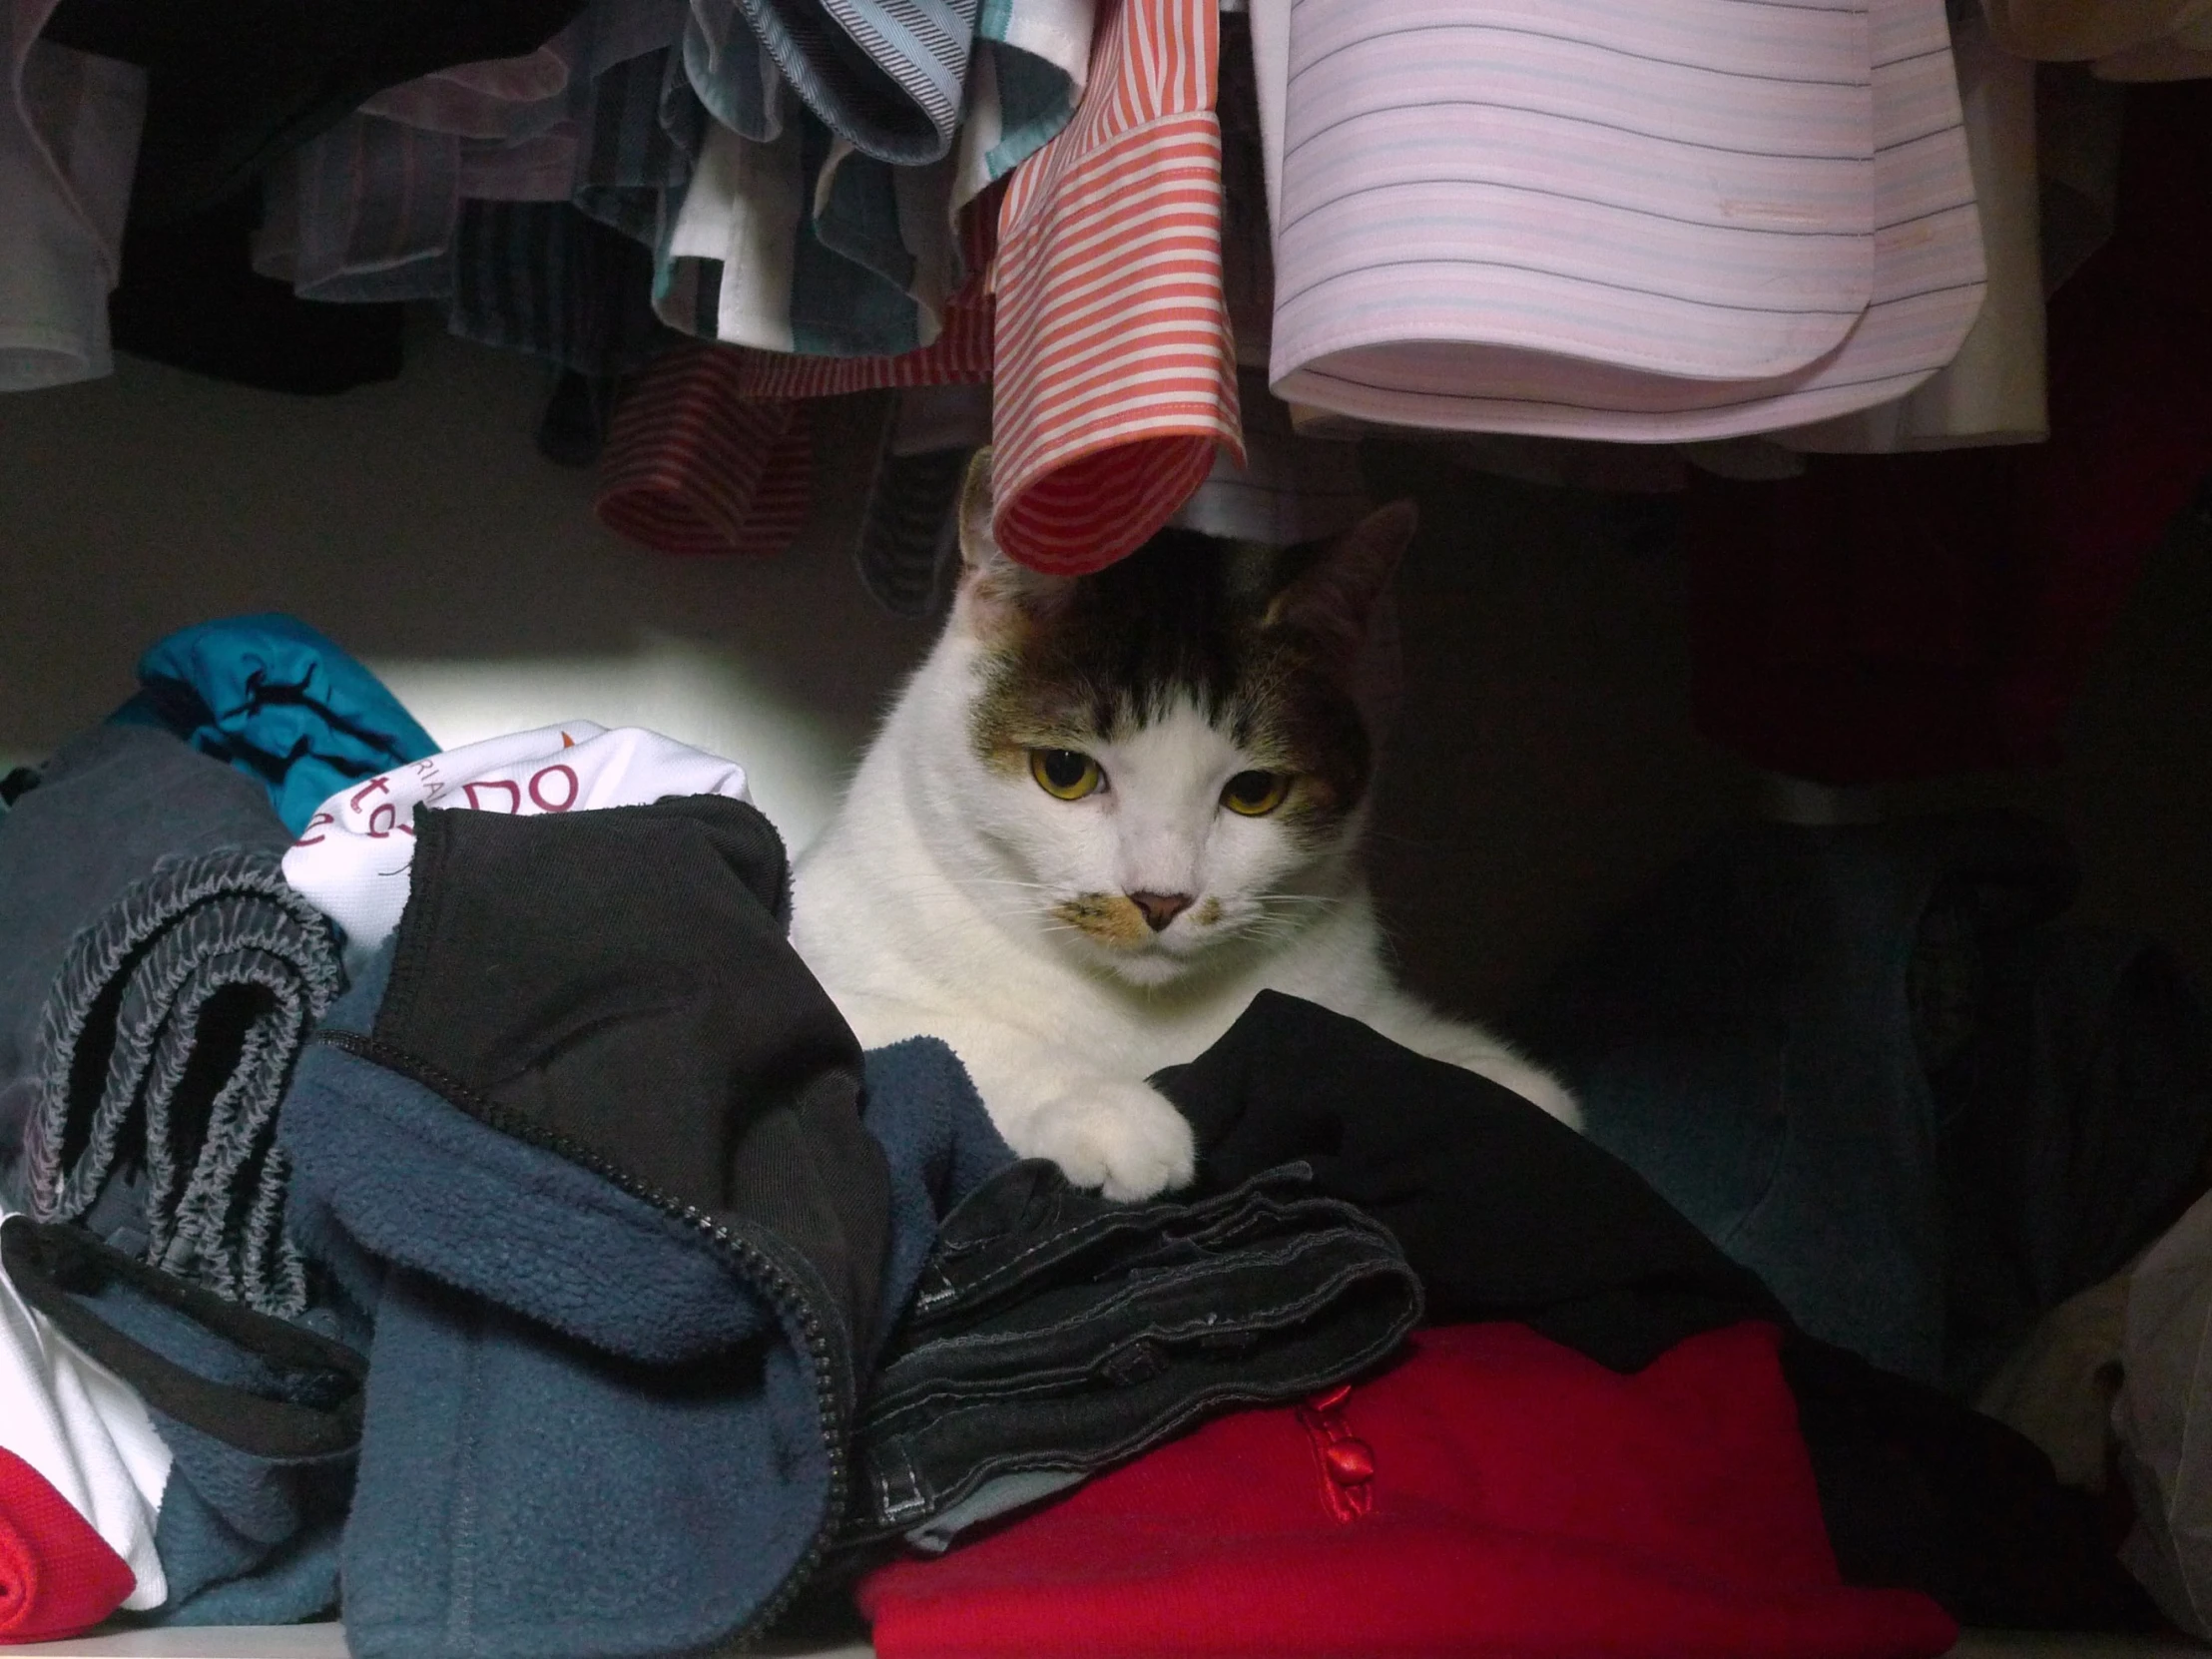 cat laying down in closet under several types of folded clothing